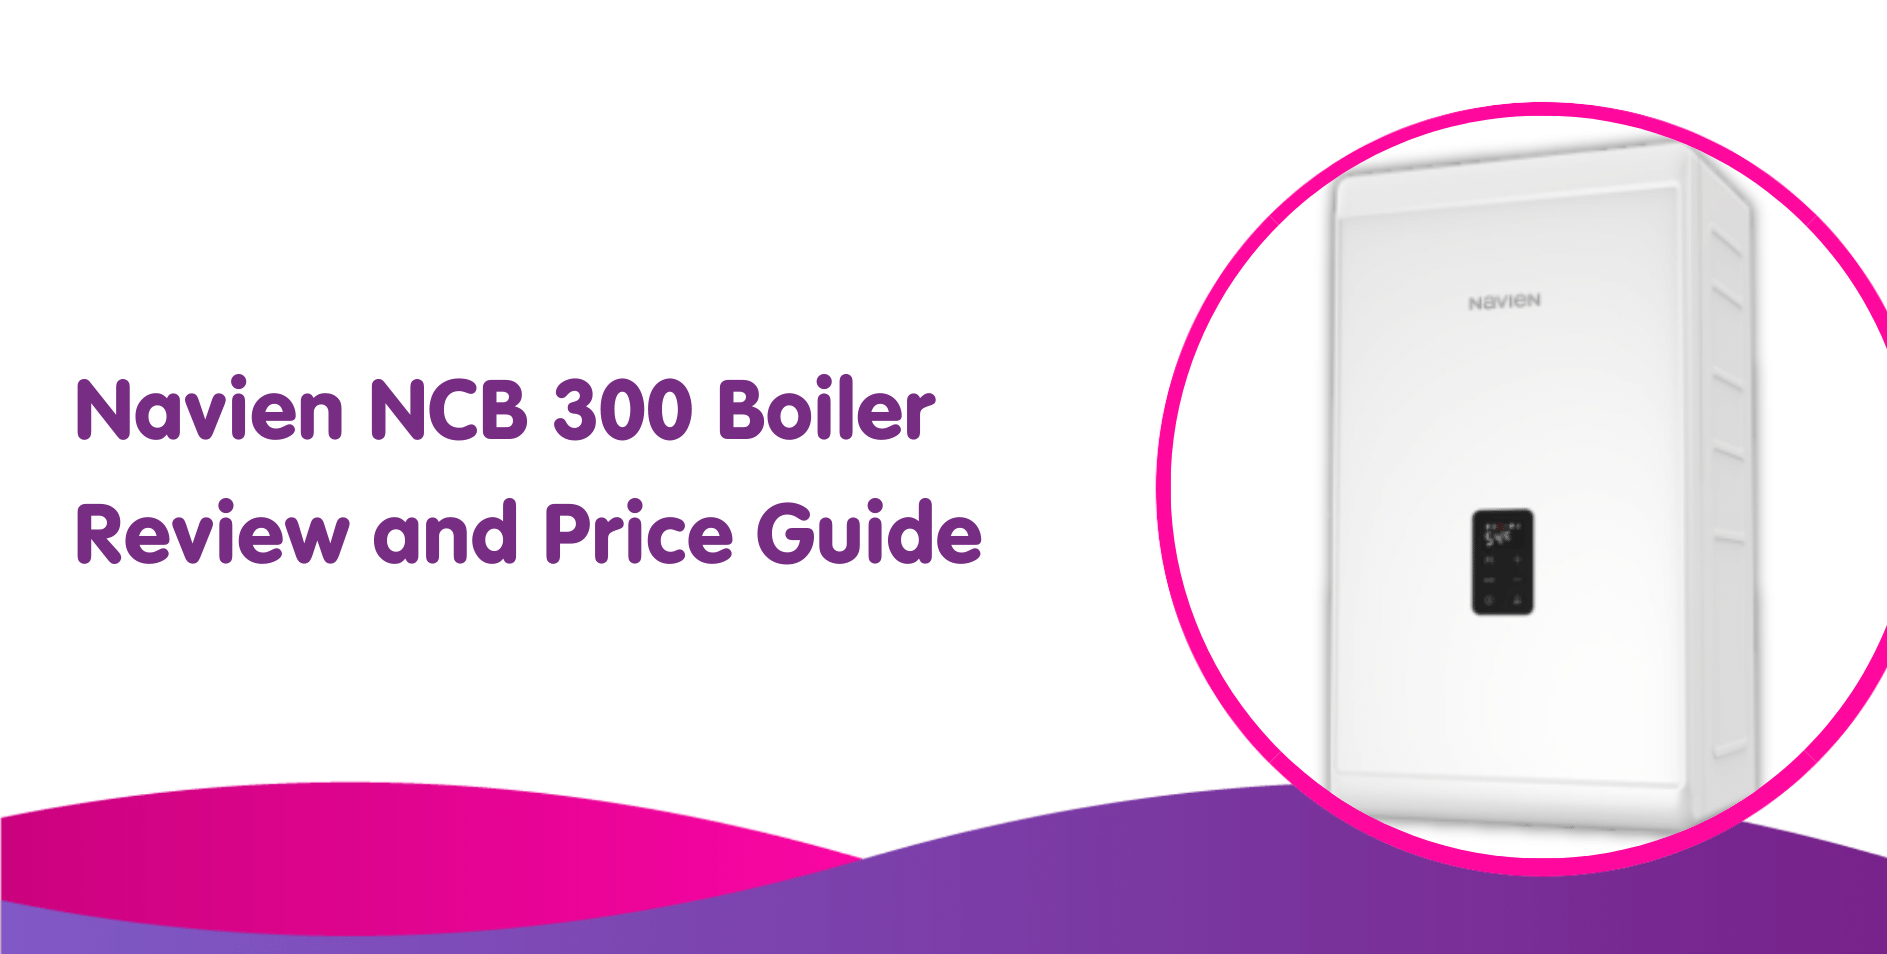 Navien NCB 300 Boiler Review and Price Guide